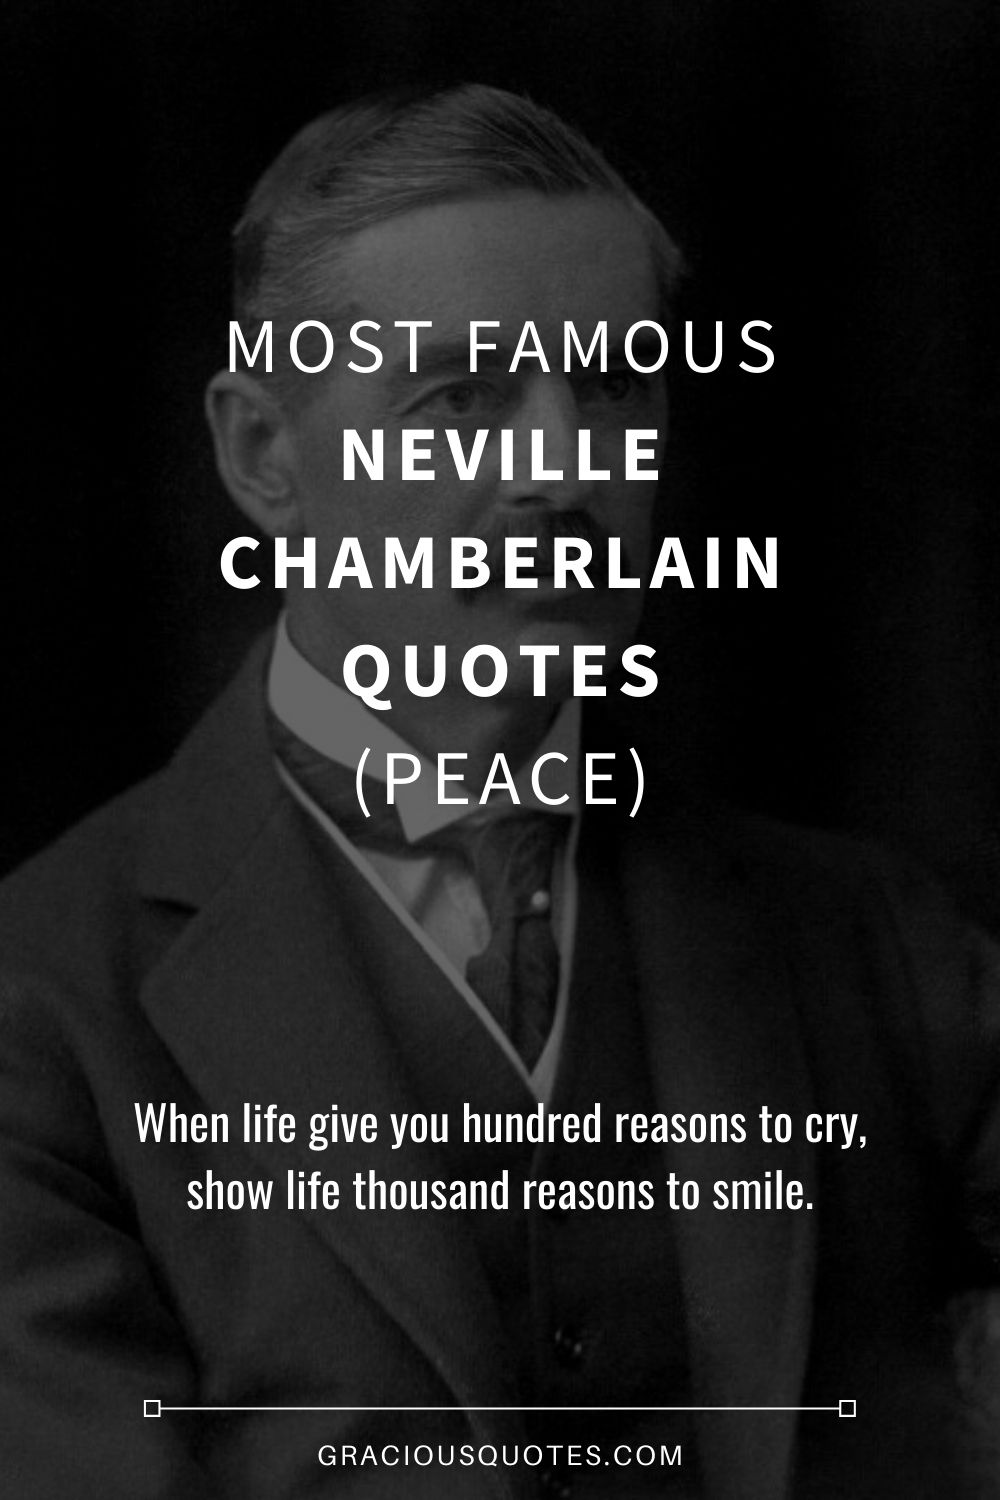 Most Famous Neville Chamberlain Quotes (PEACE) - Gracious Quotes